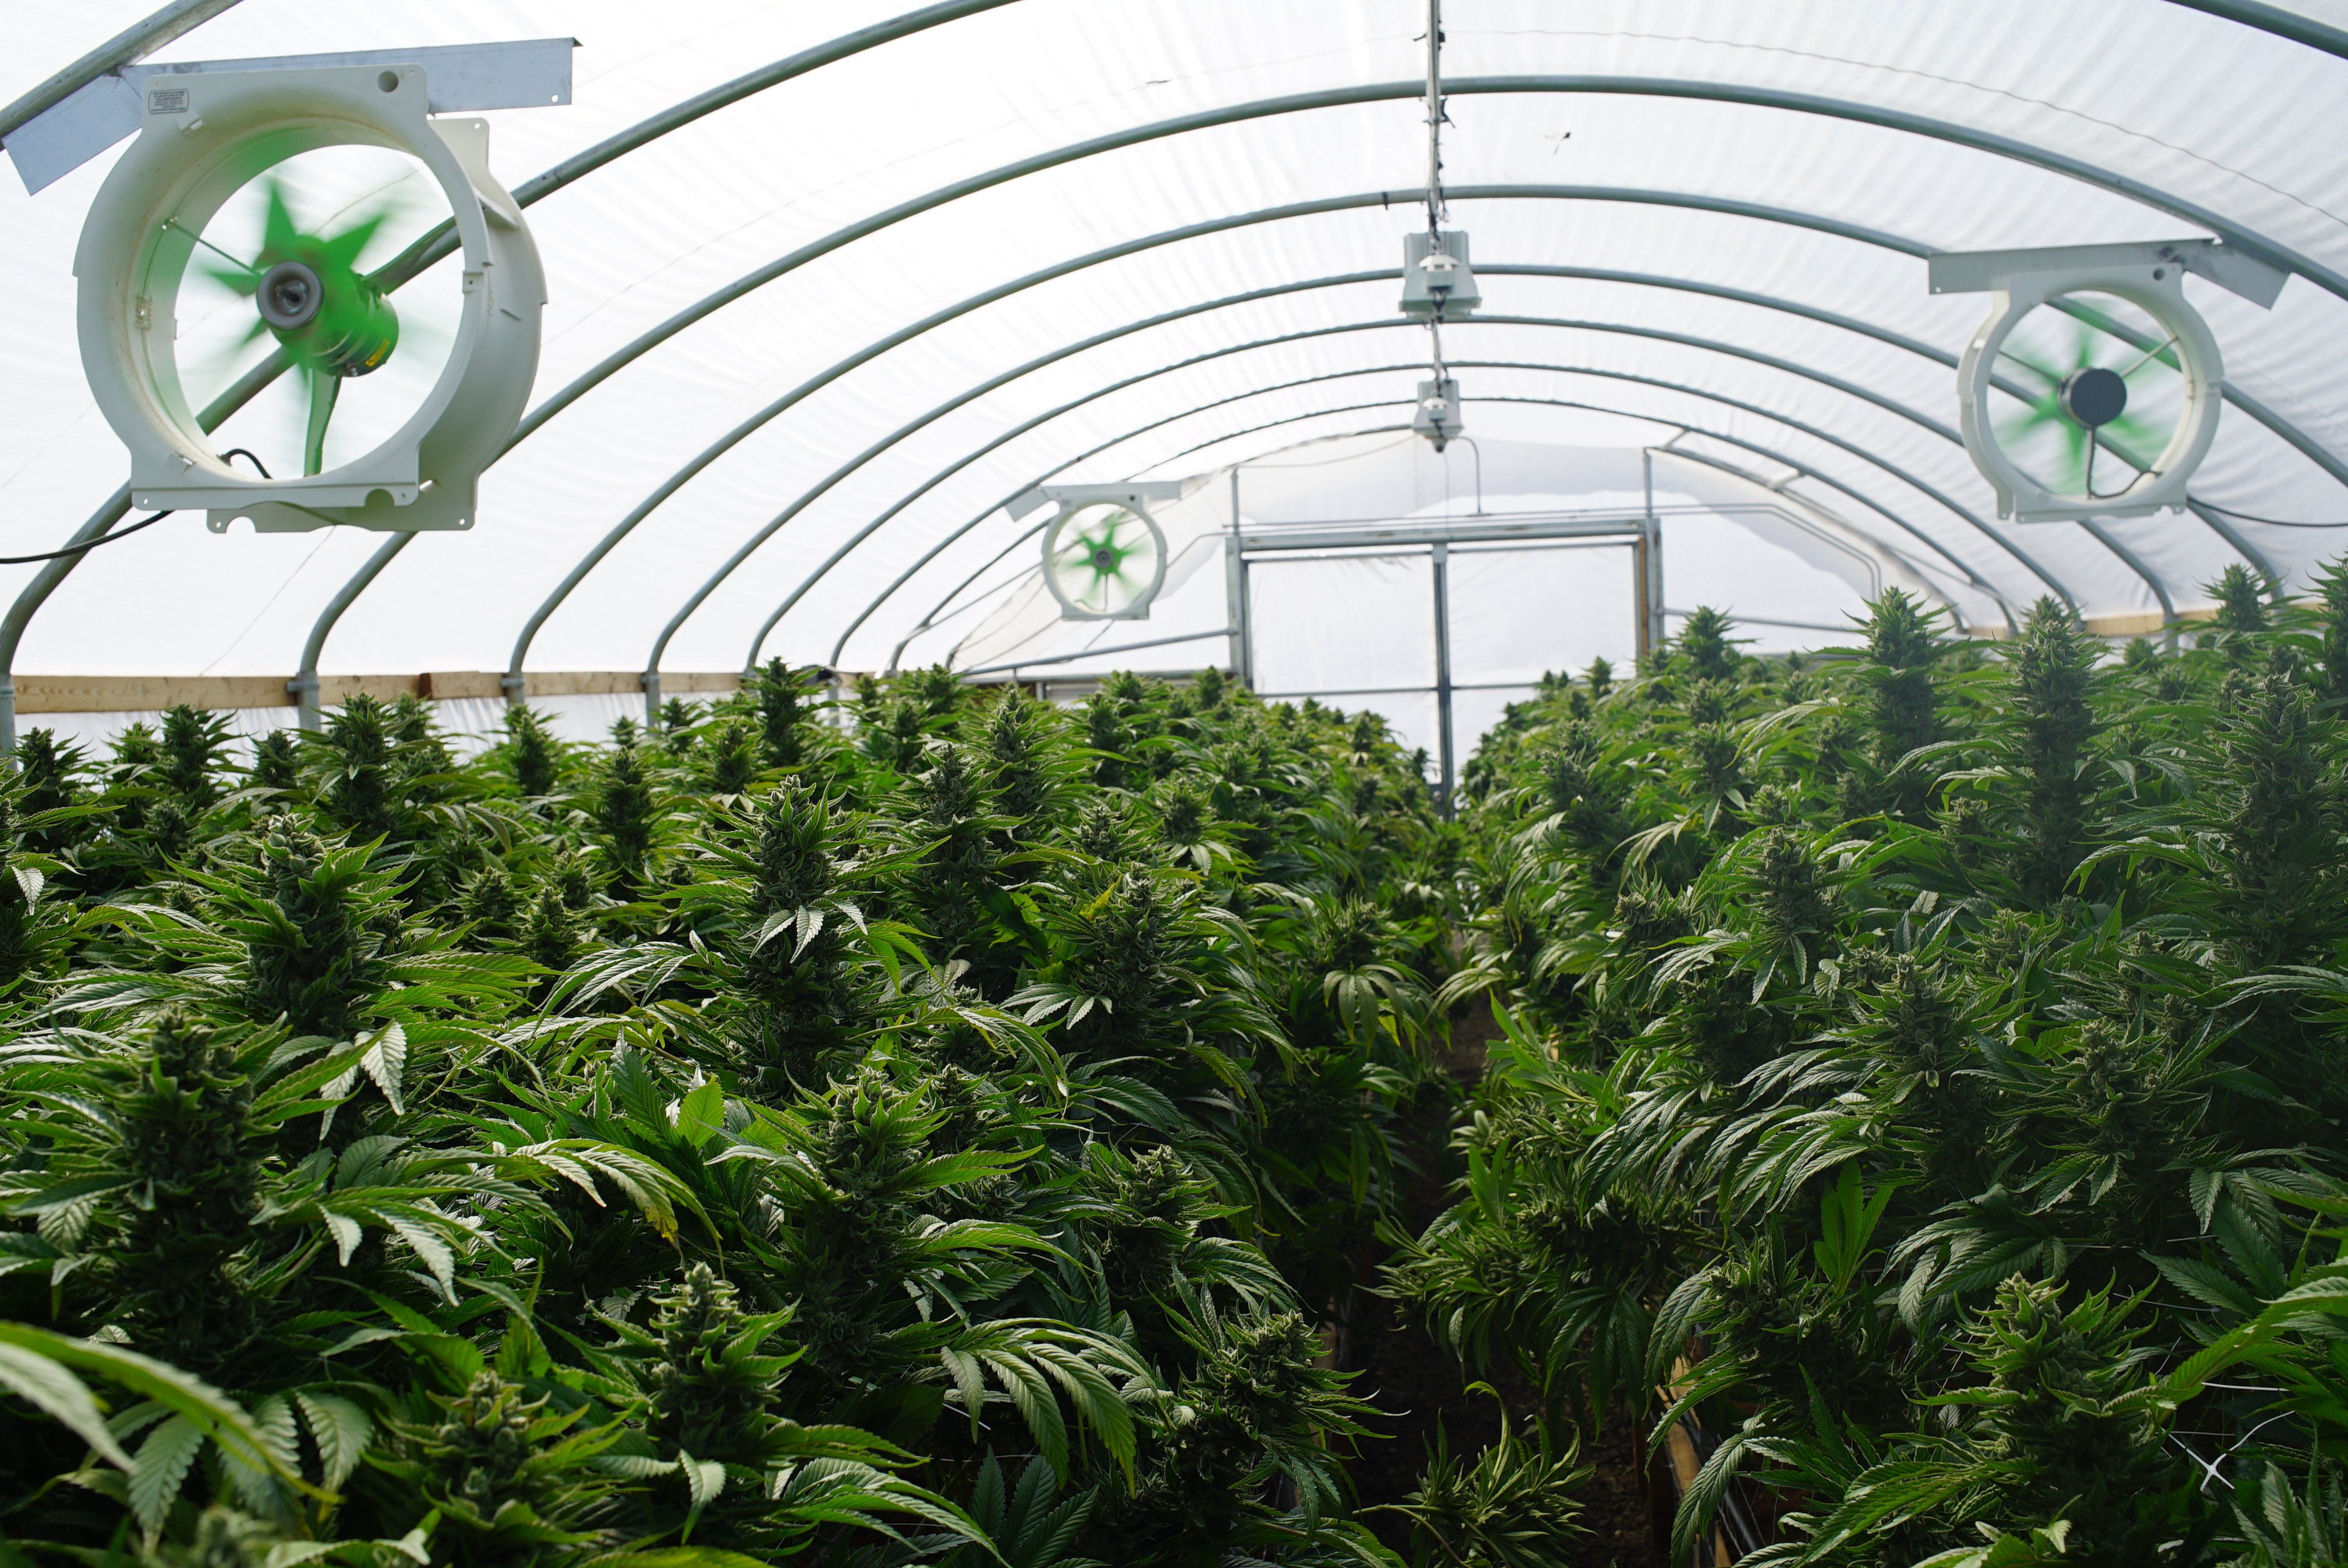 Large Legal Marijuana Farm Professional Commercial Grade Greenhouse Filled With Mature Budding Cannabis Indica Plants